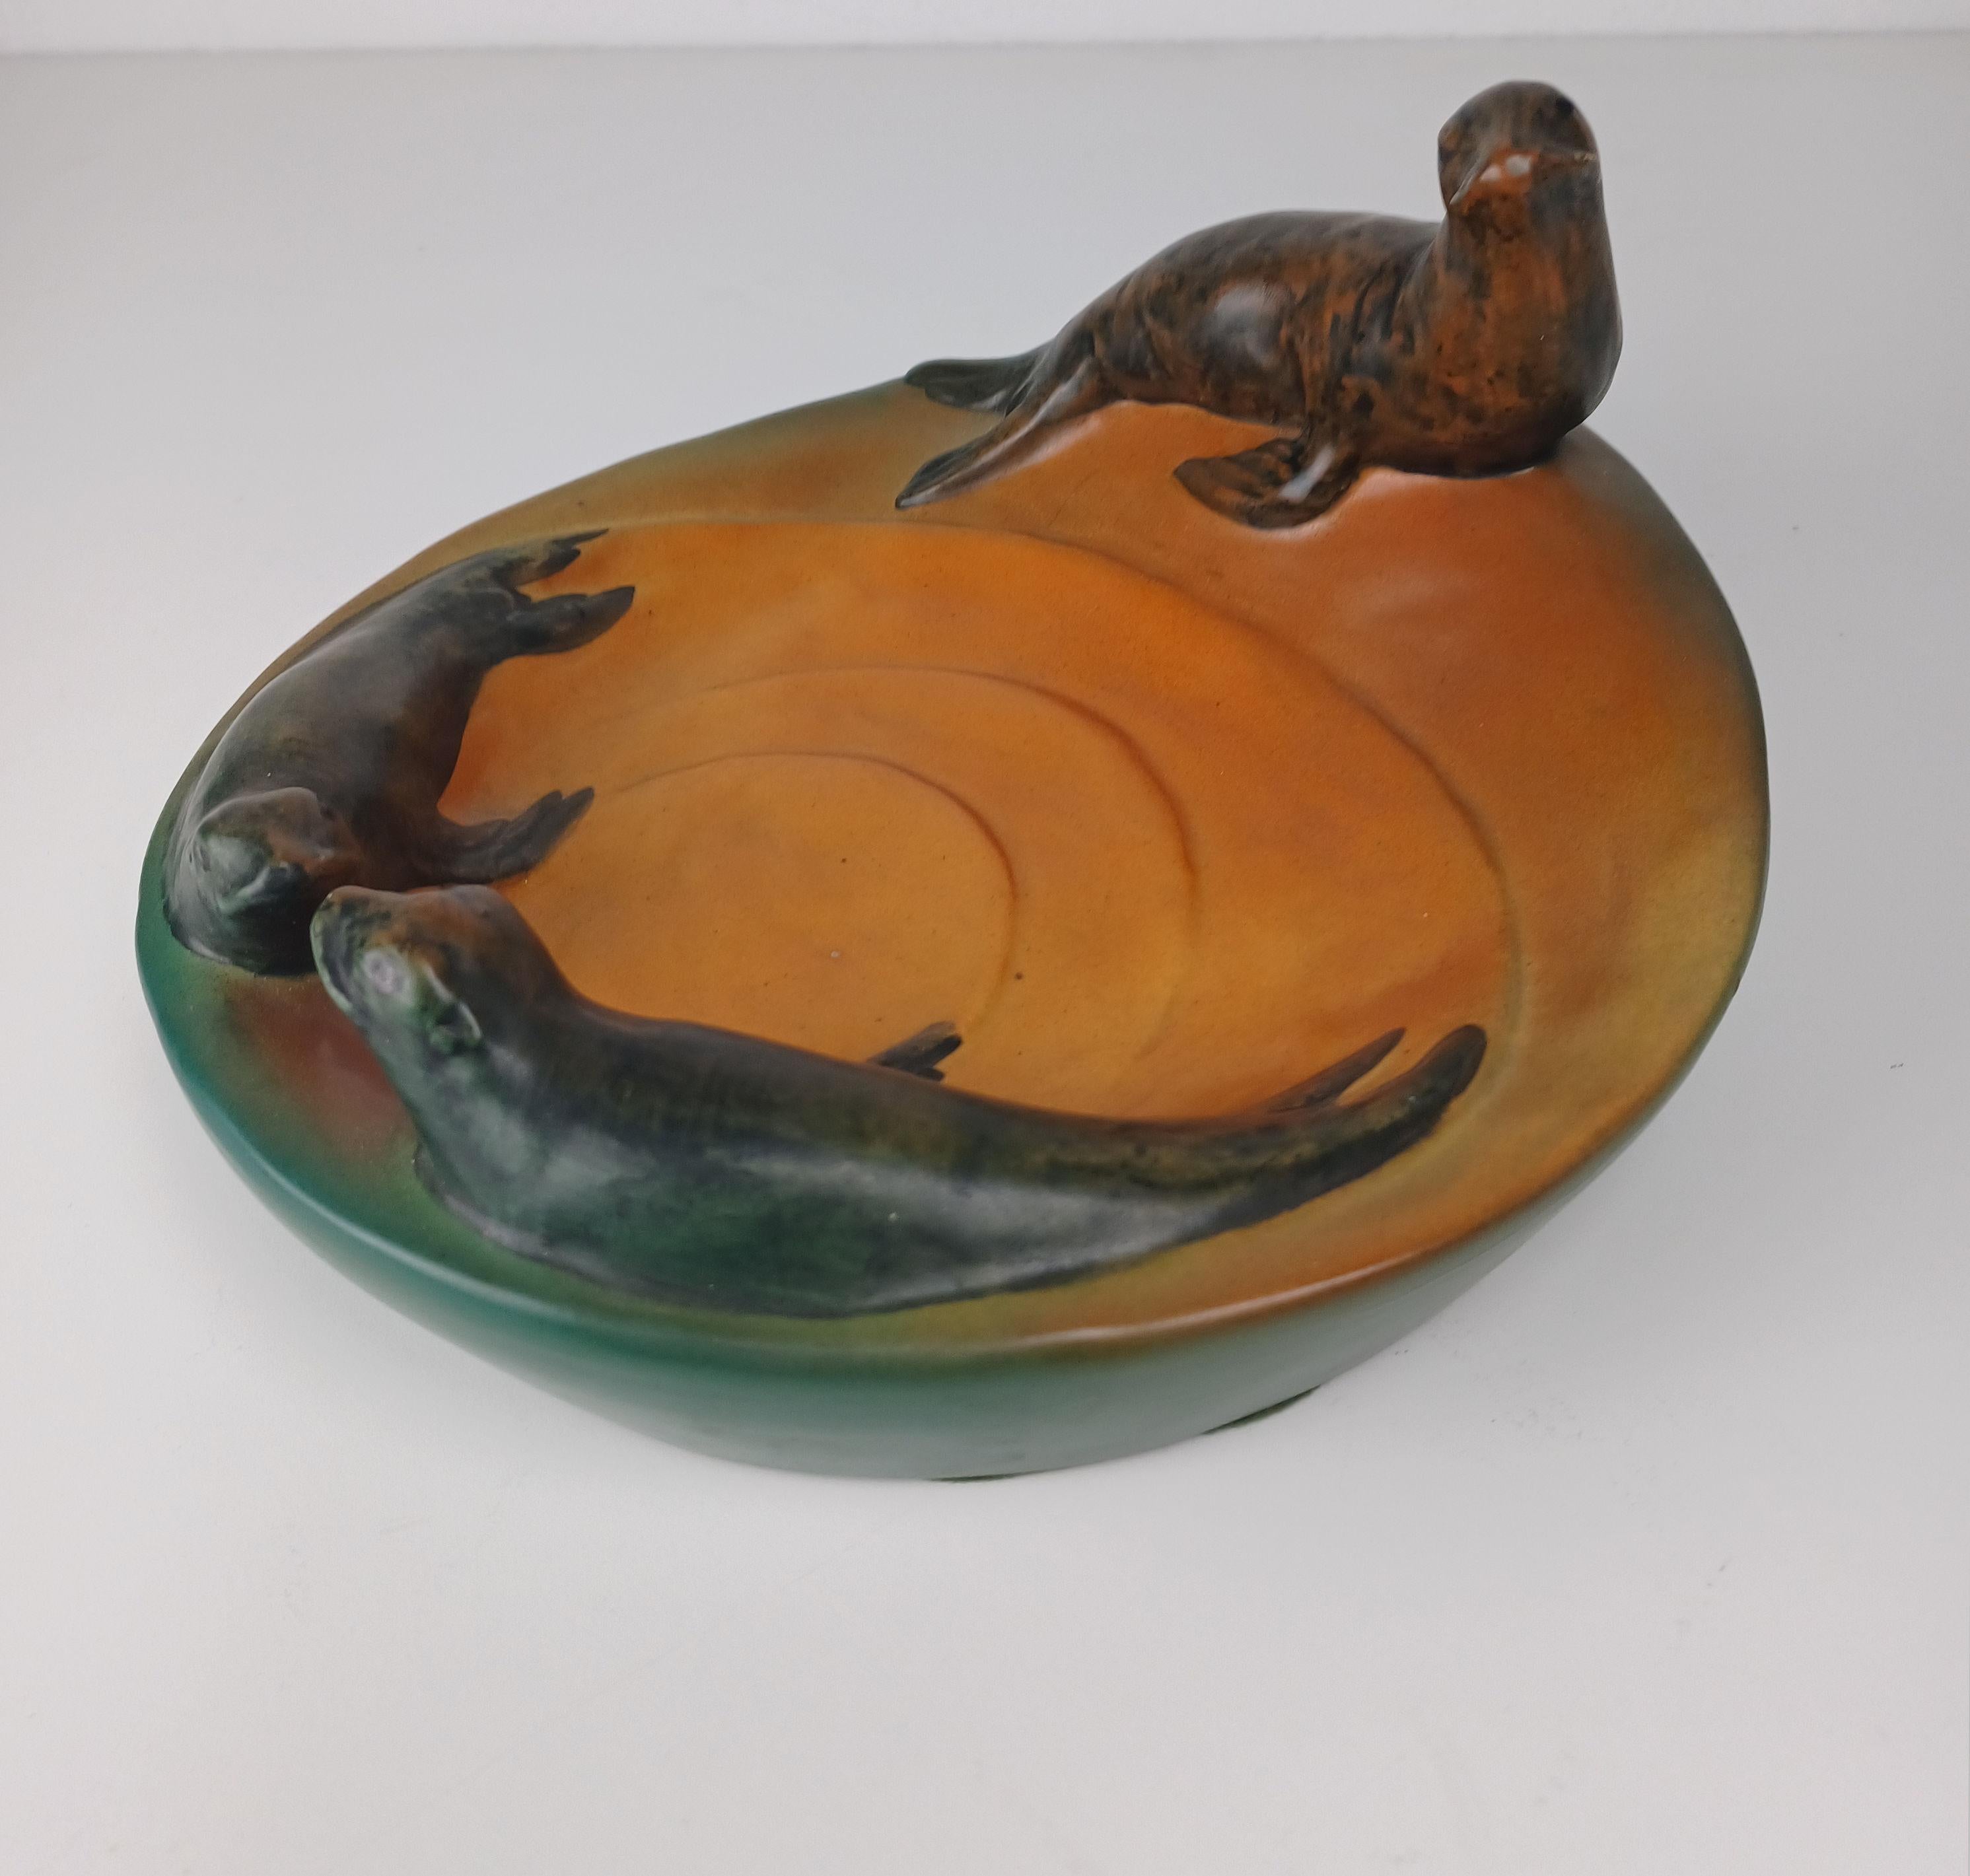 Hand-Crafted 1910's Danish Art Nouveau Handcrafted Sealion Bowl - Ash Tray by P. Ipsens Enke